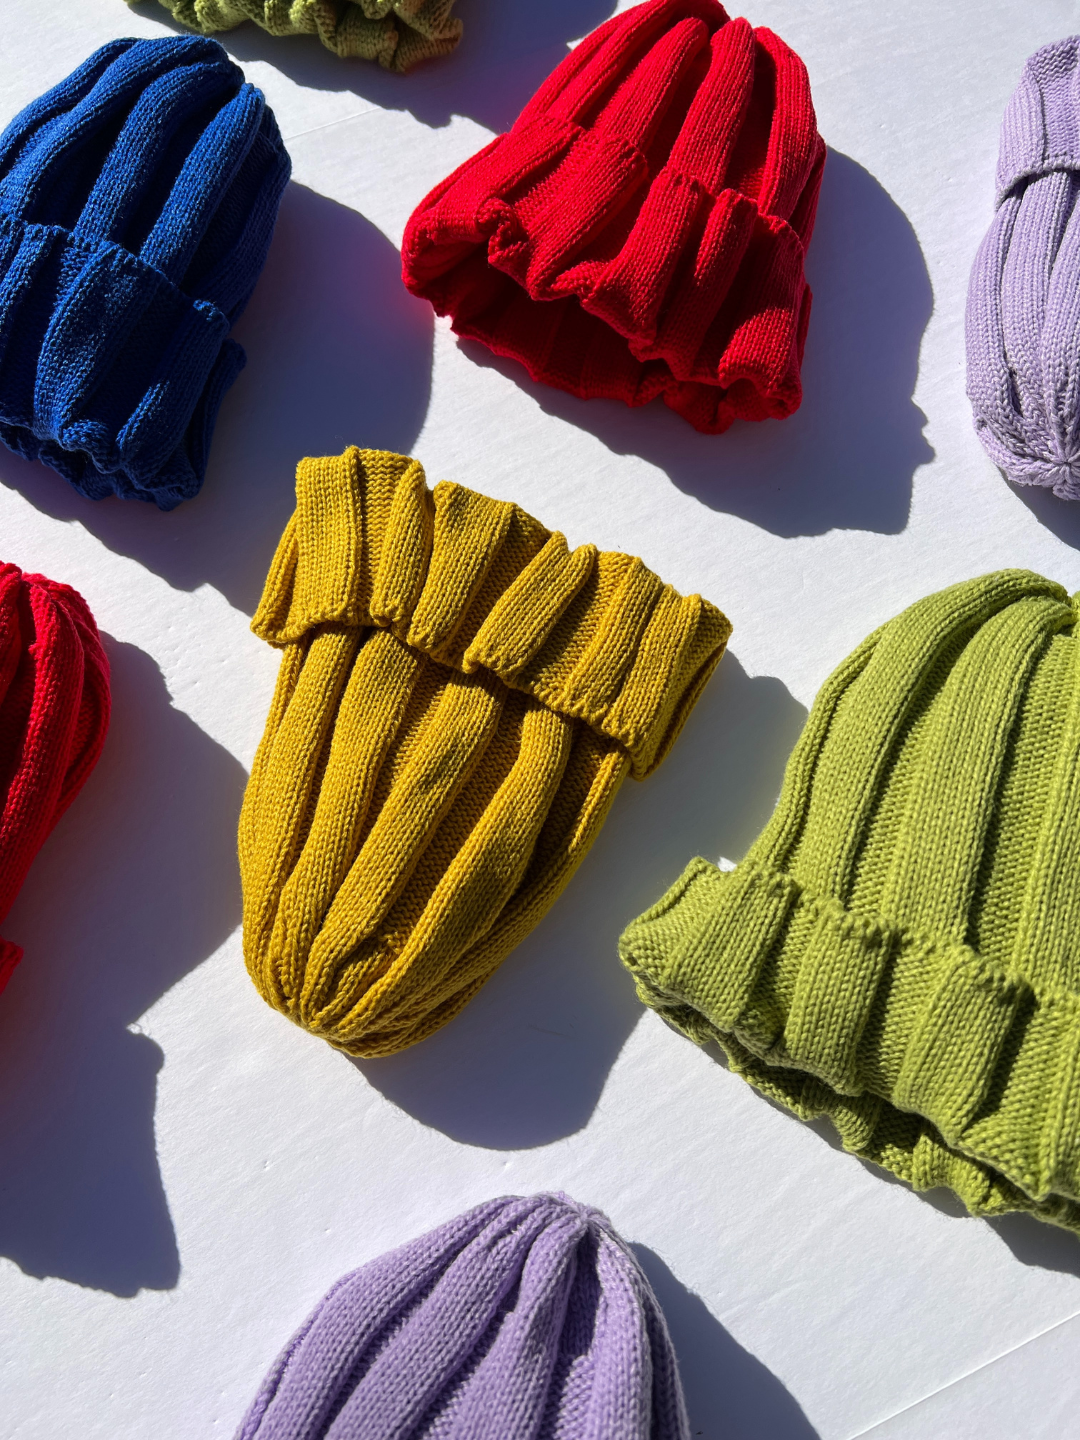 A selection of kids' kniited beanies in different colors